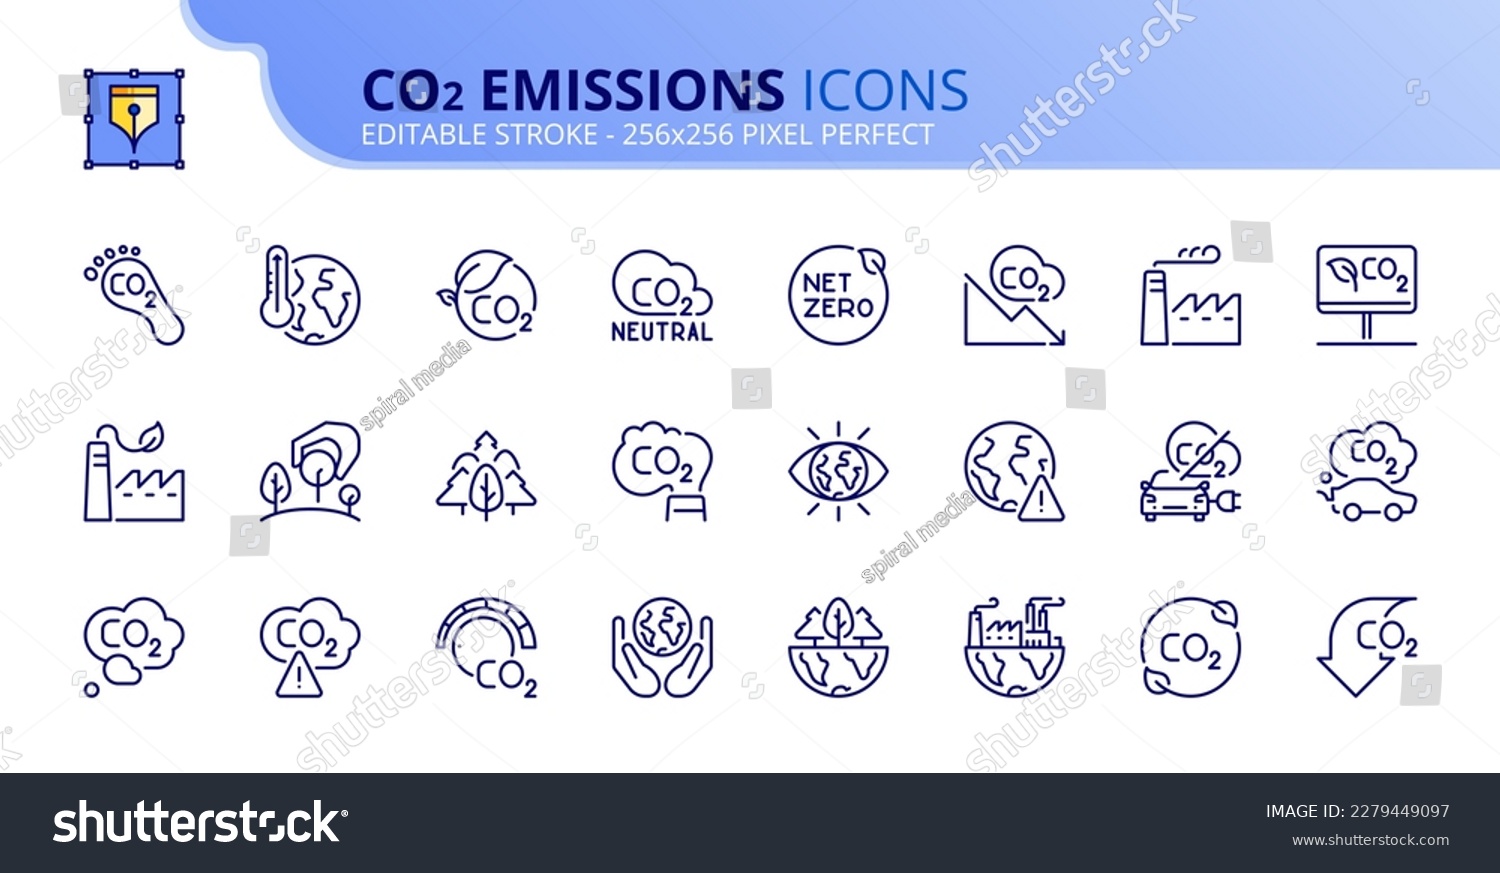 Line icons about co2 emissions. Contains such icons as tree planting, net zero, and reduced carbon dioxide. Editable stroke Vector 256x256 pixel perfect #2279449097